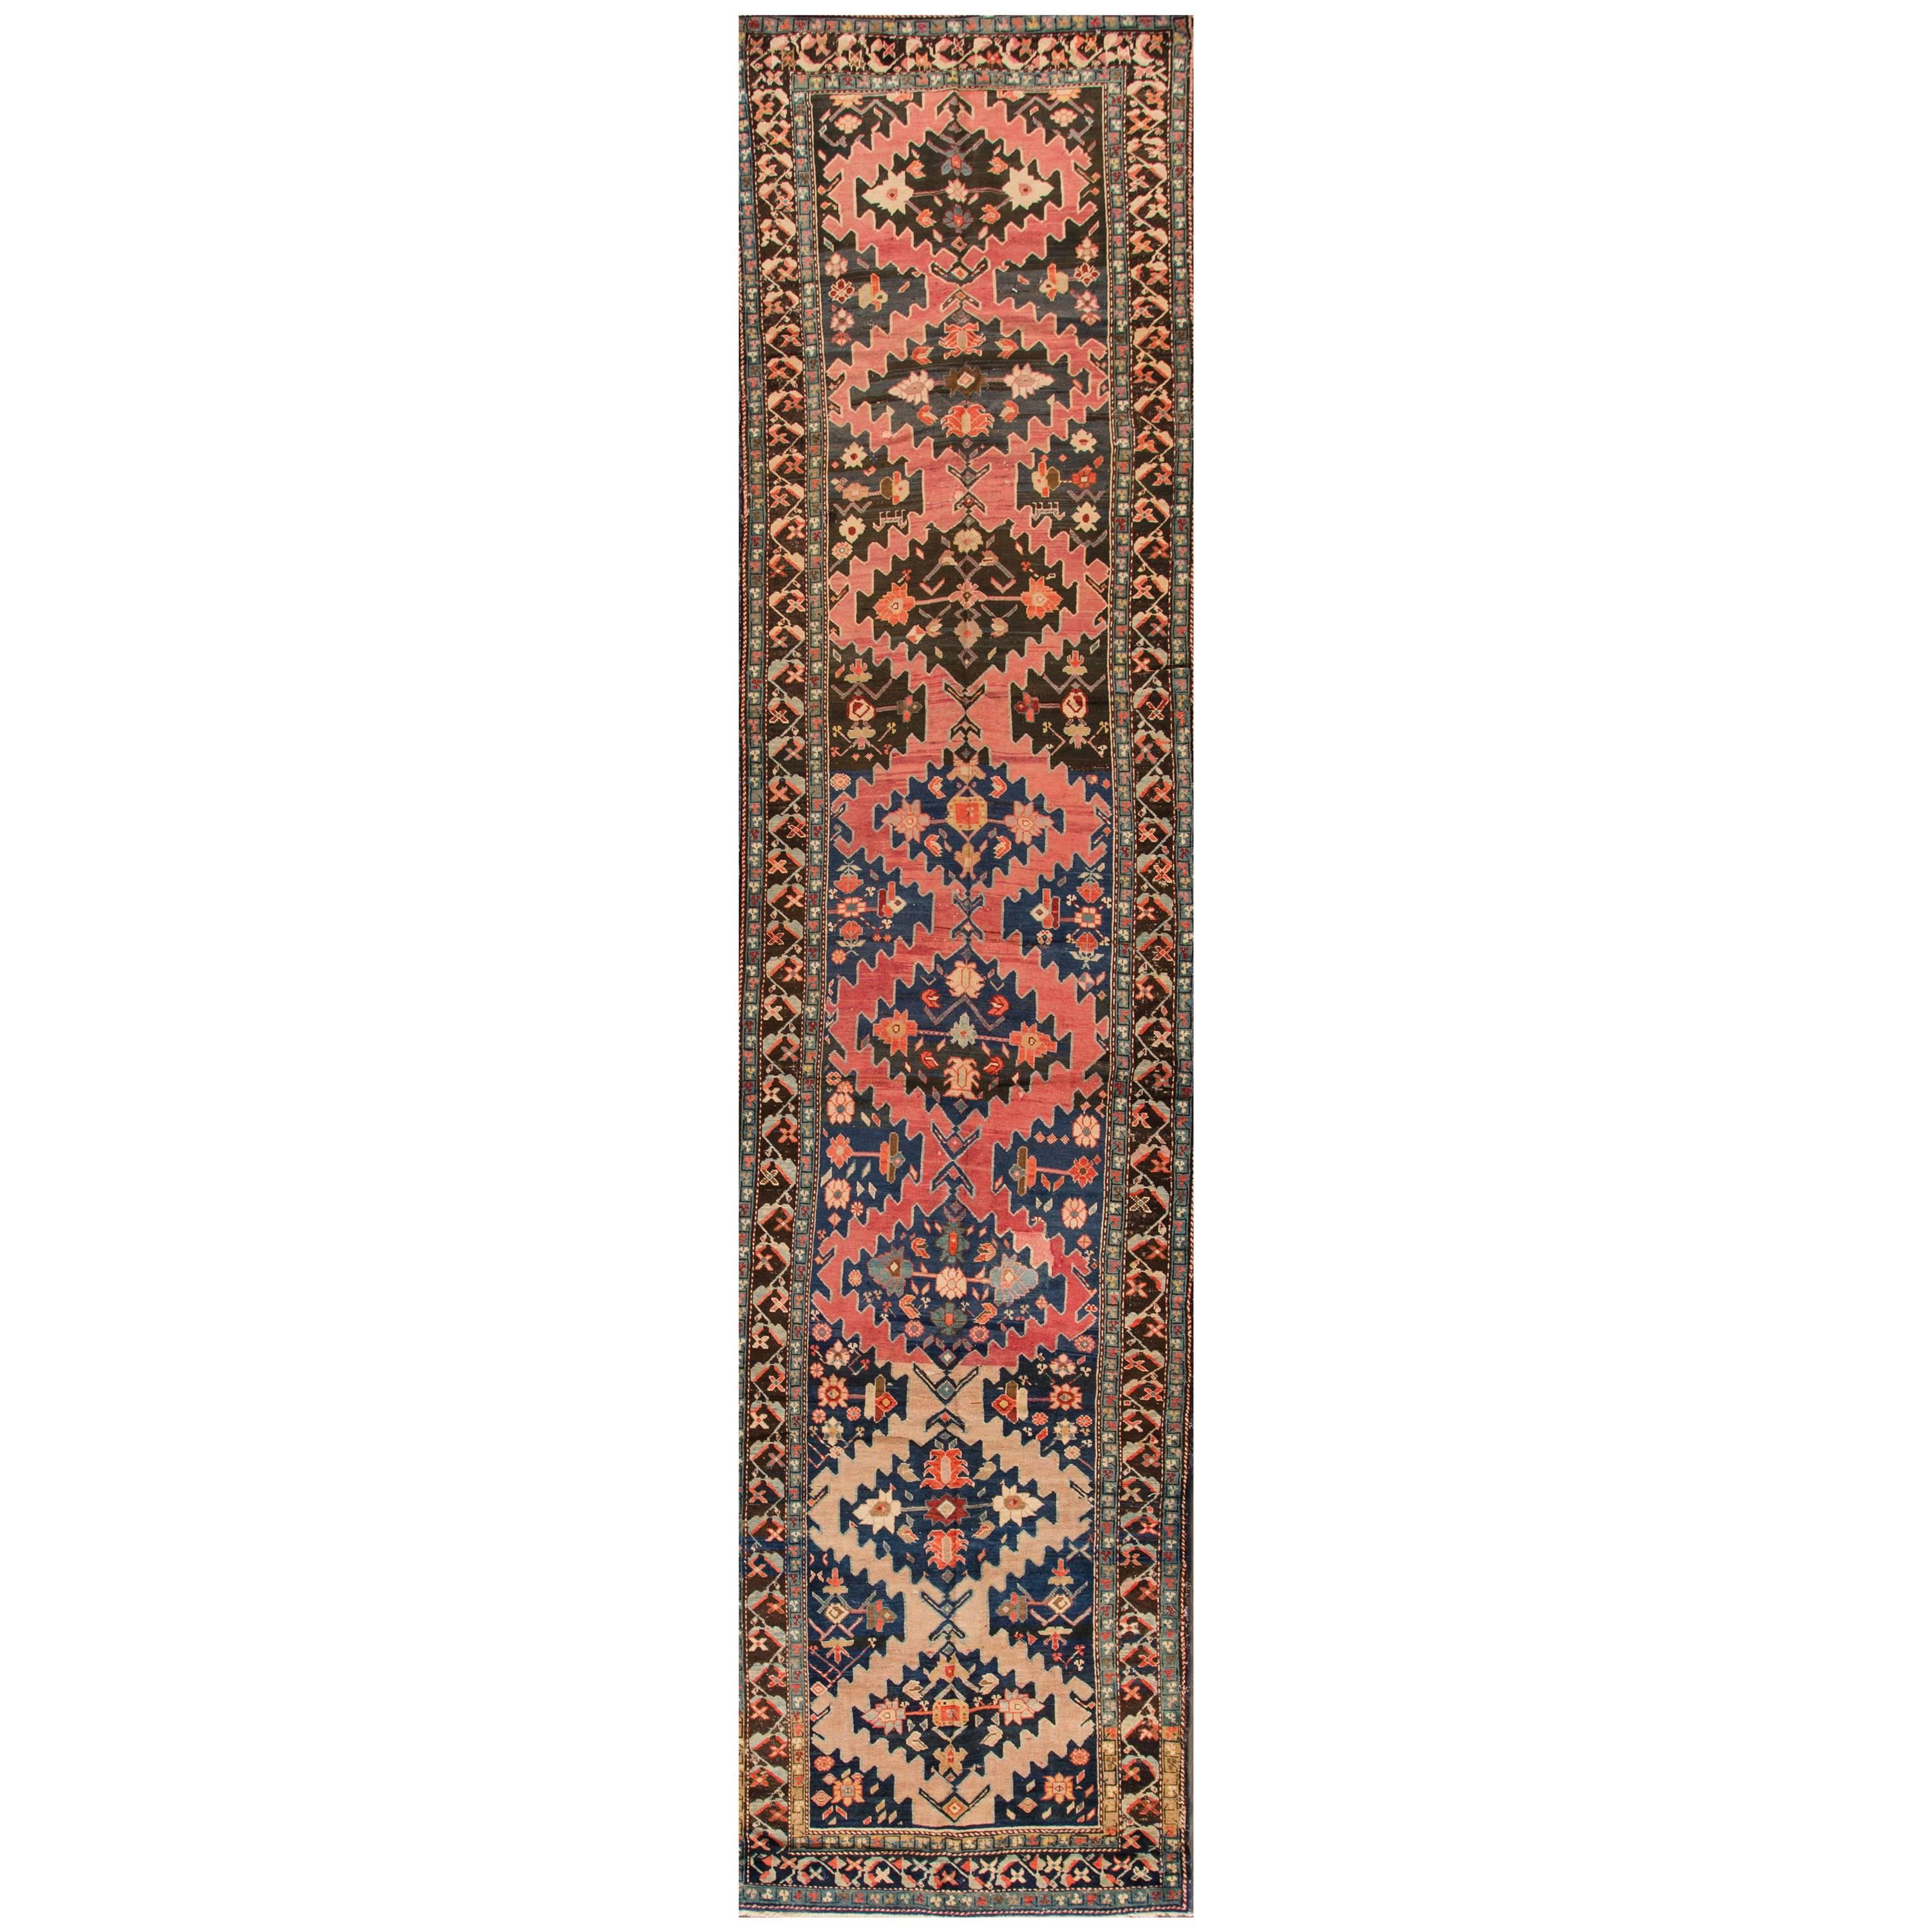 Early 1900s Multicolored Russian Karabagh Rug For Sale